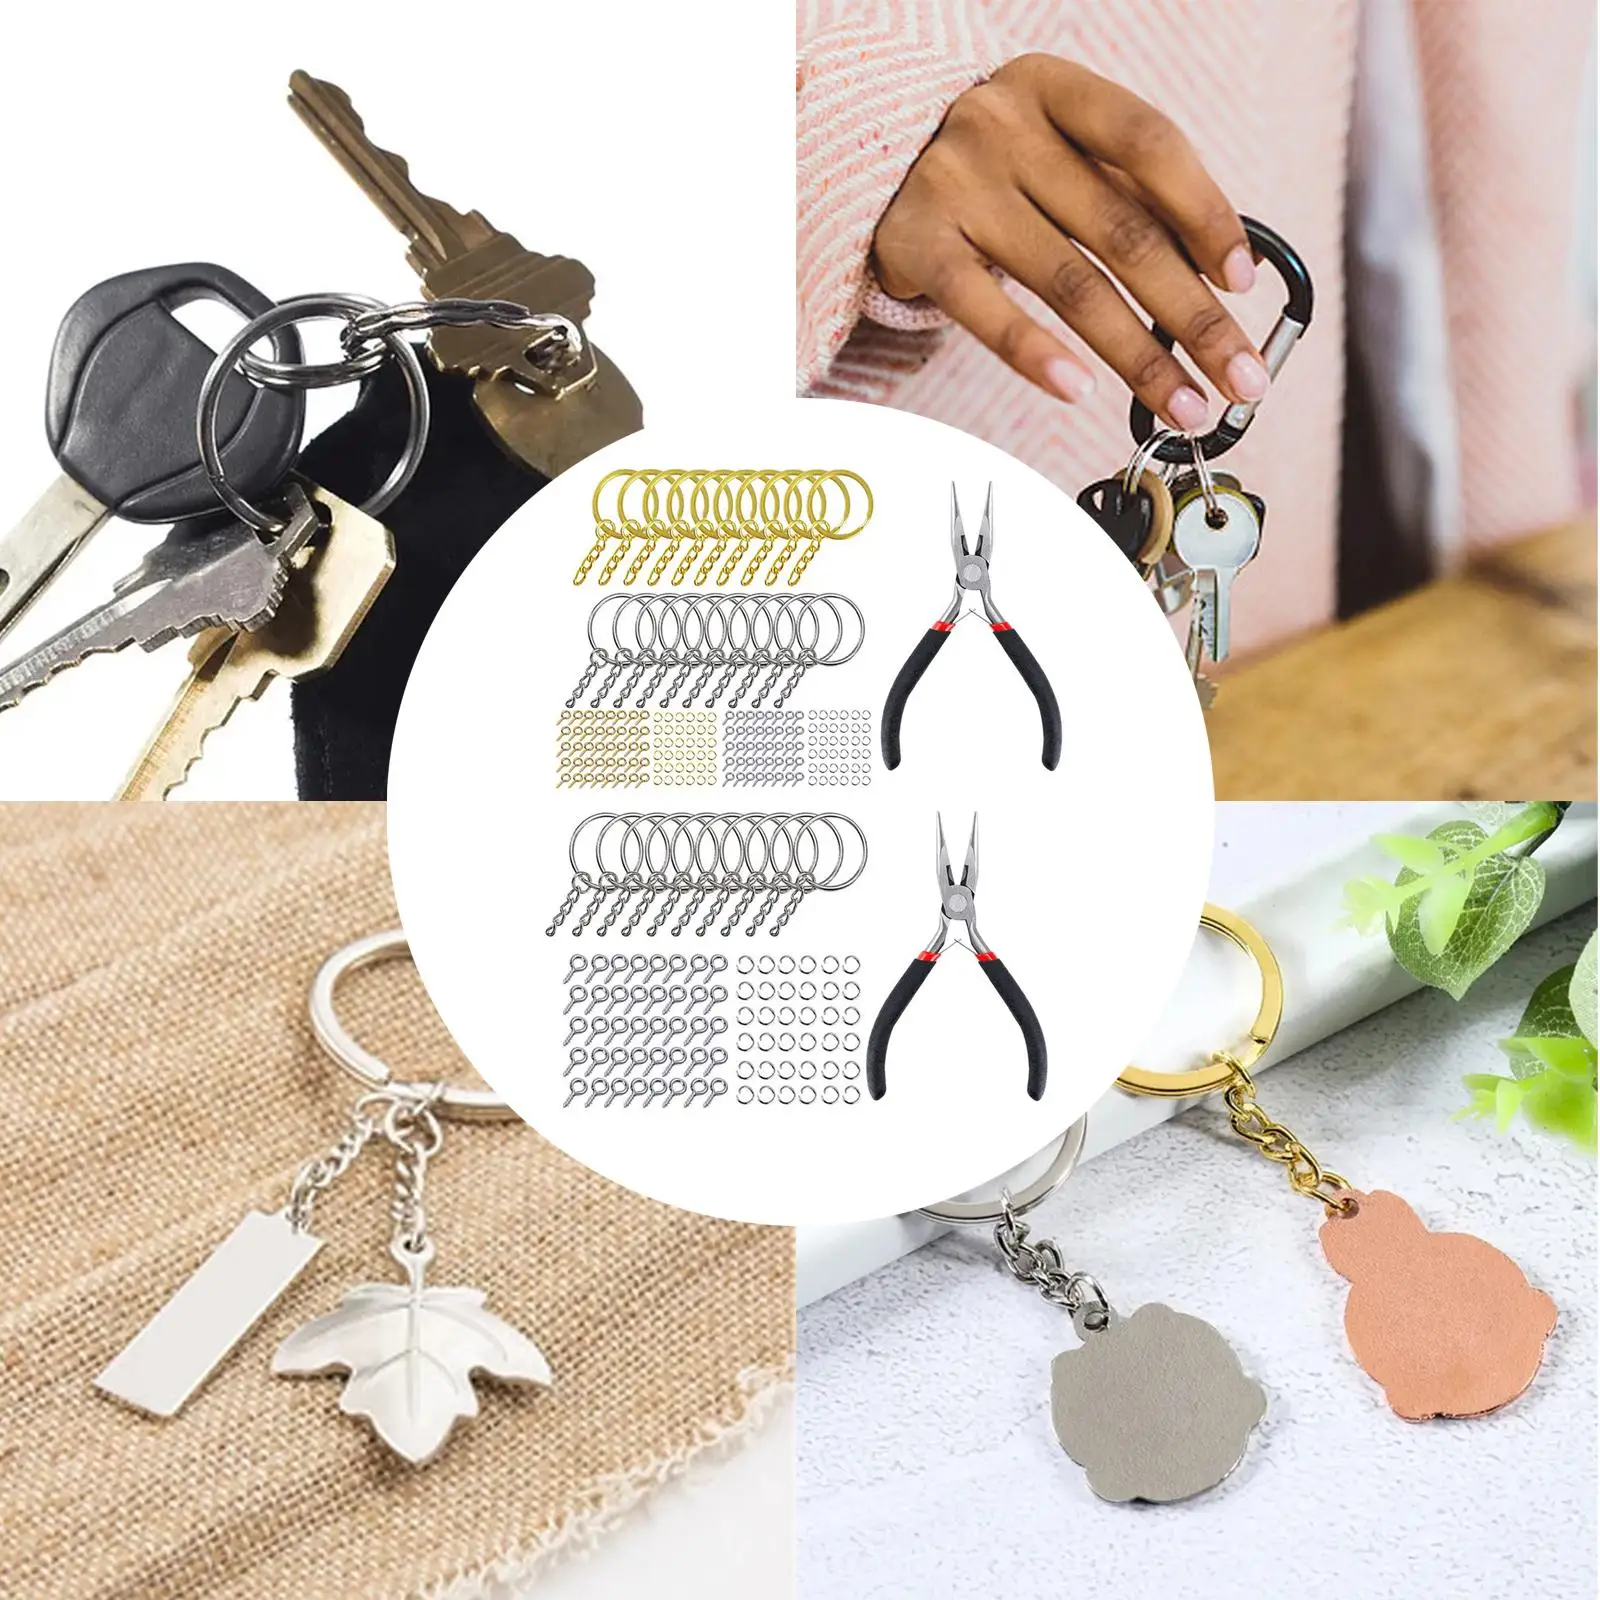 221x Split Key Rings with Chain Set Connector for DIY Art Crafts Charms Accessories